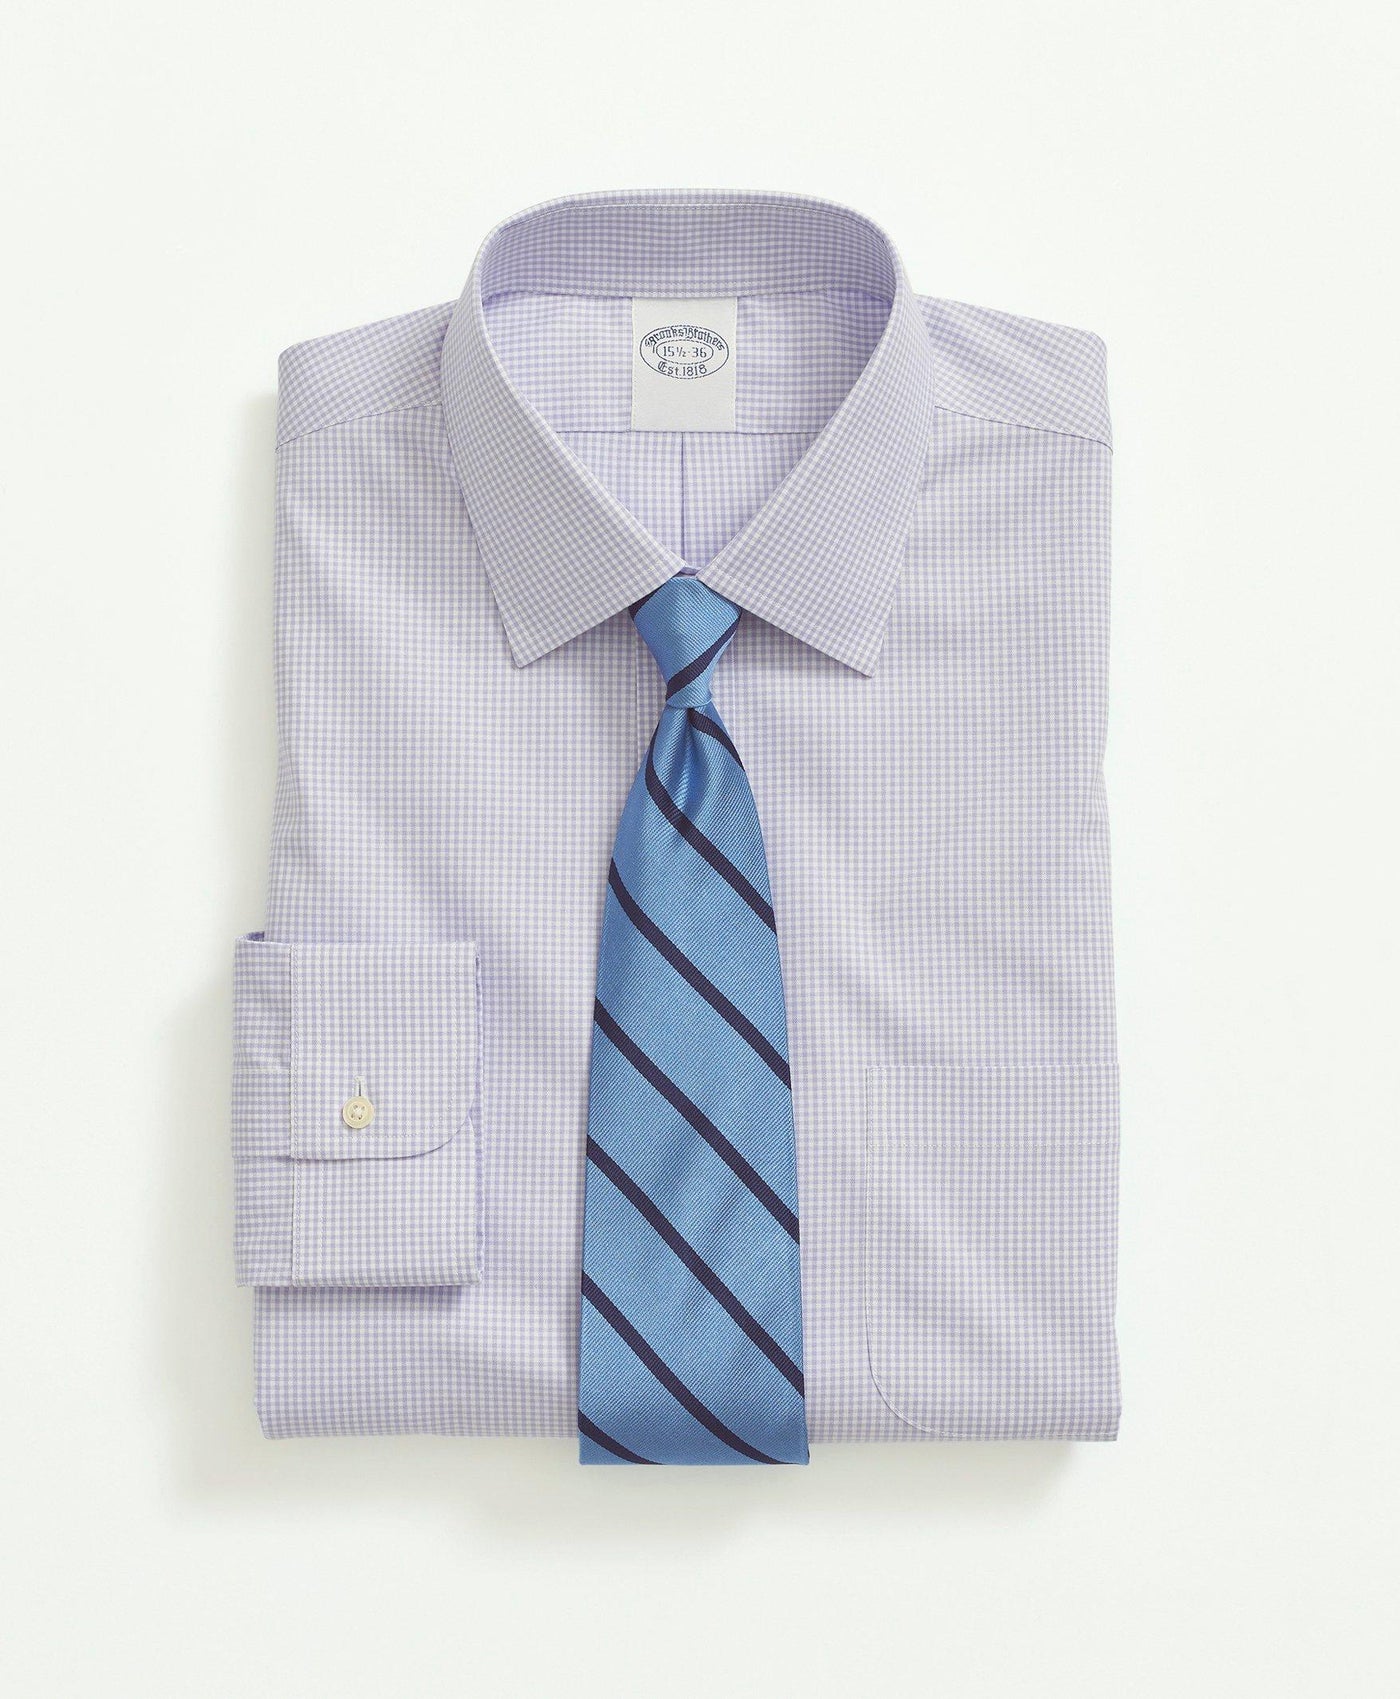 Milano Slim-Fit Stretch Supima Cotton Non-Iron Pinpoint Oxford Ainsley Collar, Gingham Dress Shirt - Brooks Brothers Canada